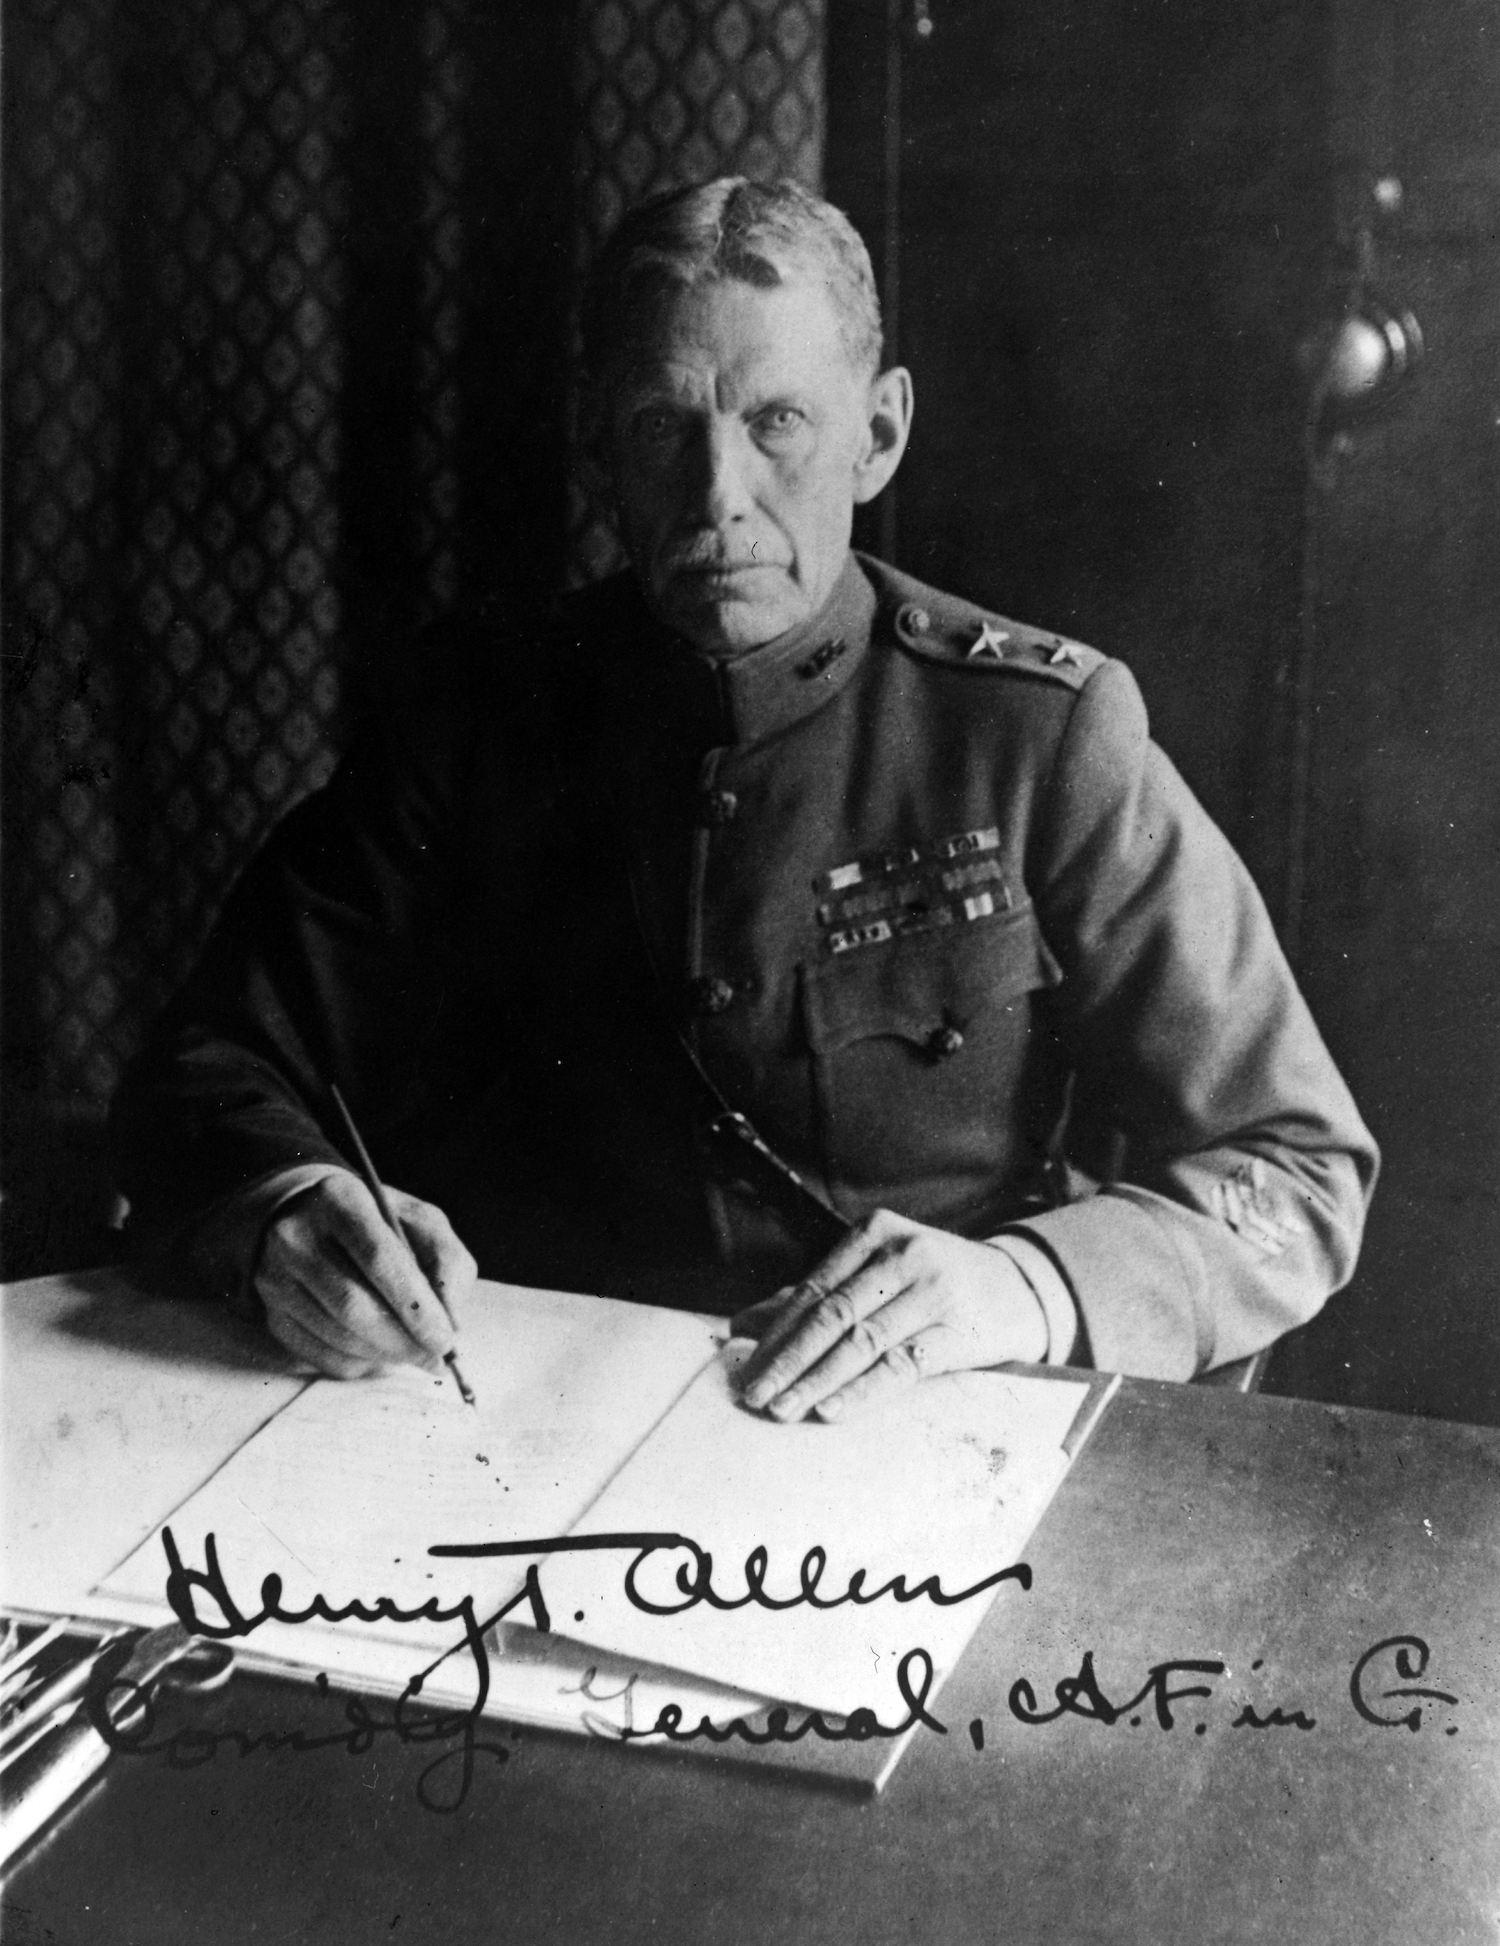 A man in military uniform sits at a desk and writes with a fountain pen in a black and white photograph signed "Henry T. Allen, Com'di'g General, A.F. in G."